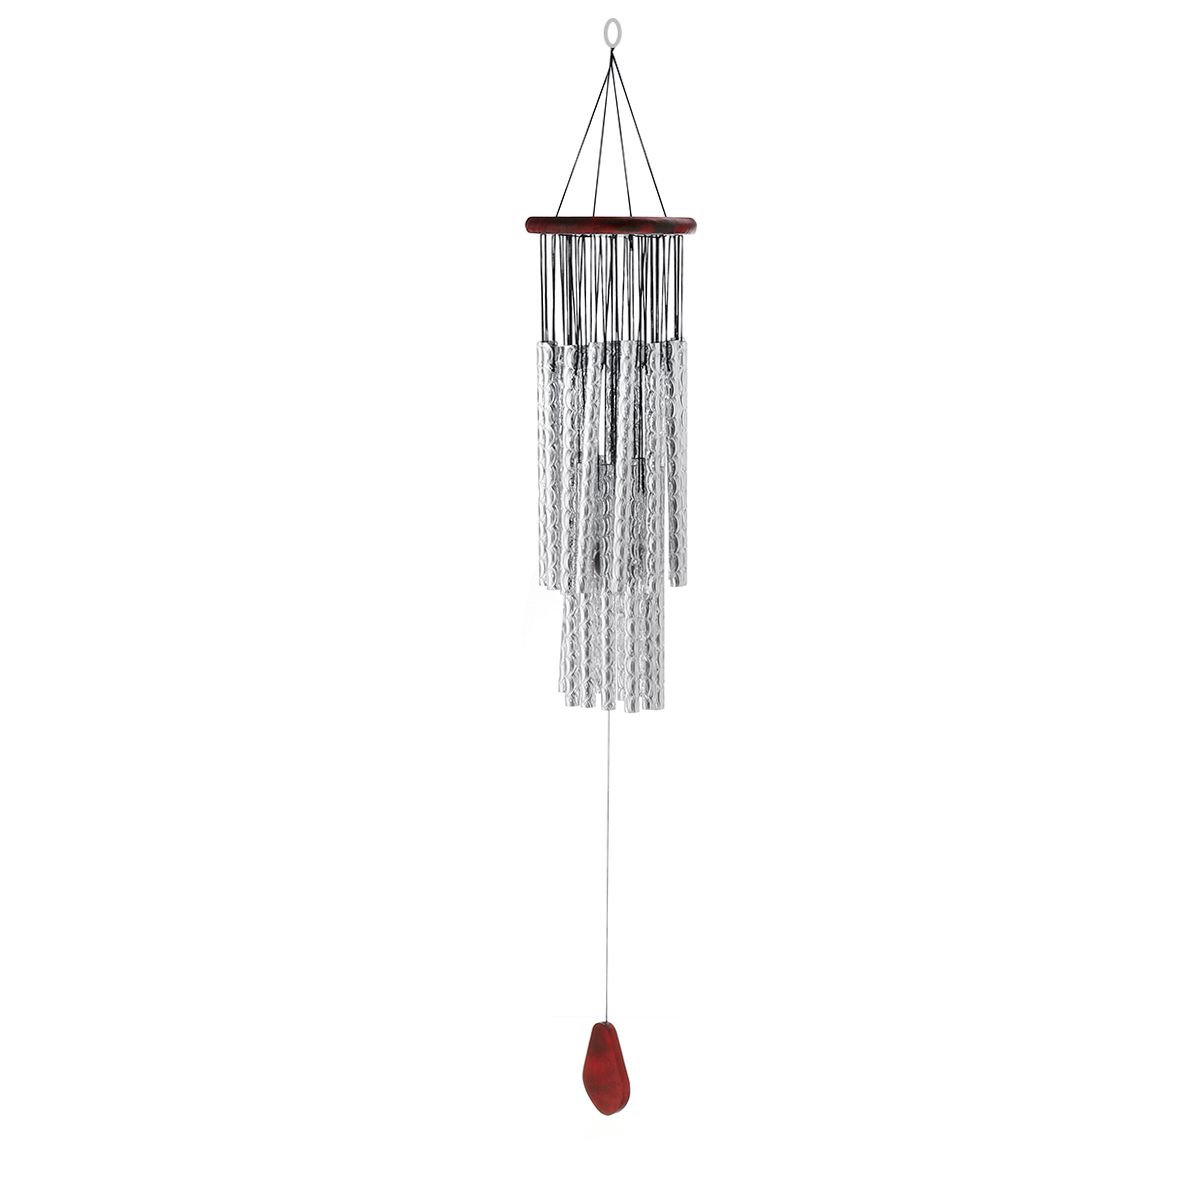 1827-Tubes-Hanging-Wind-Chimes-Wood-Metal-for-Home-Yard-Garden-Decoration-Gift-1679180